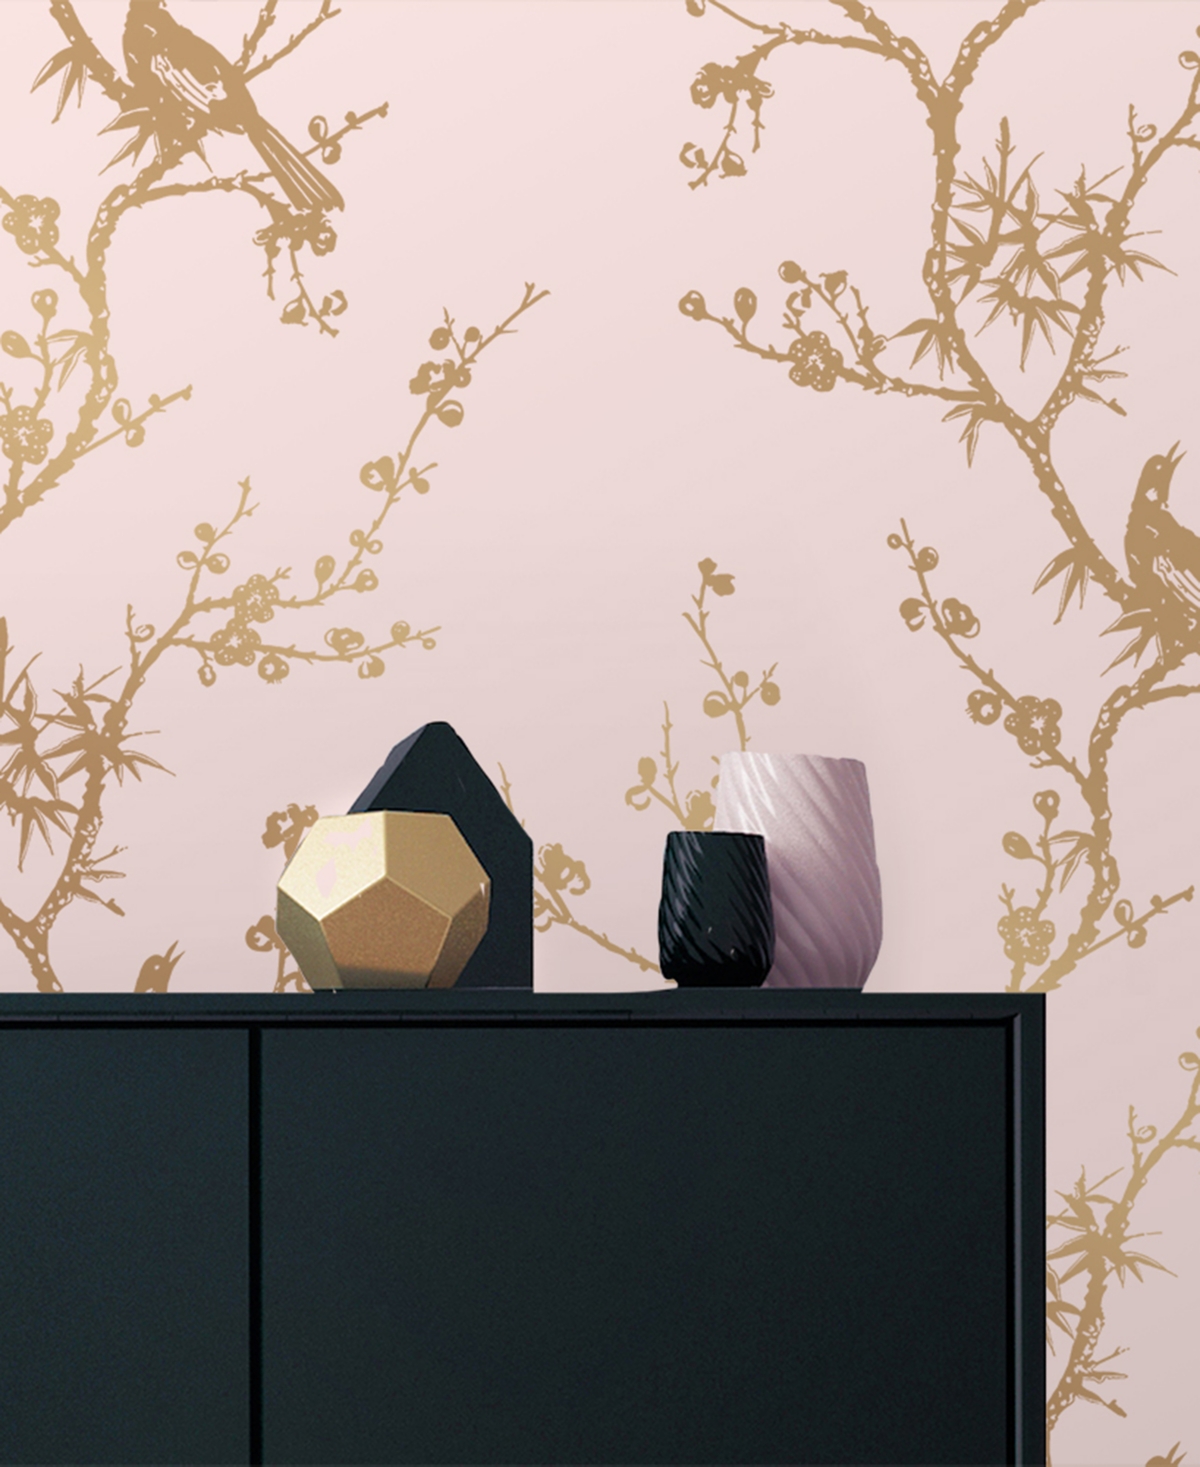 Shop Tempaper Cynthia Rowley For  Bird Watching Rose Pink & Gold Peel And Stick Wallpaper In Light,pastel Pink